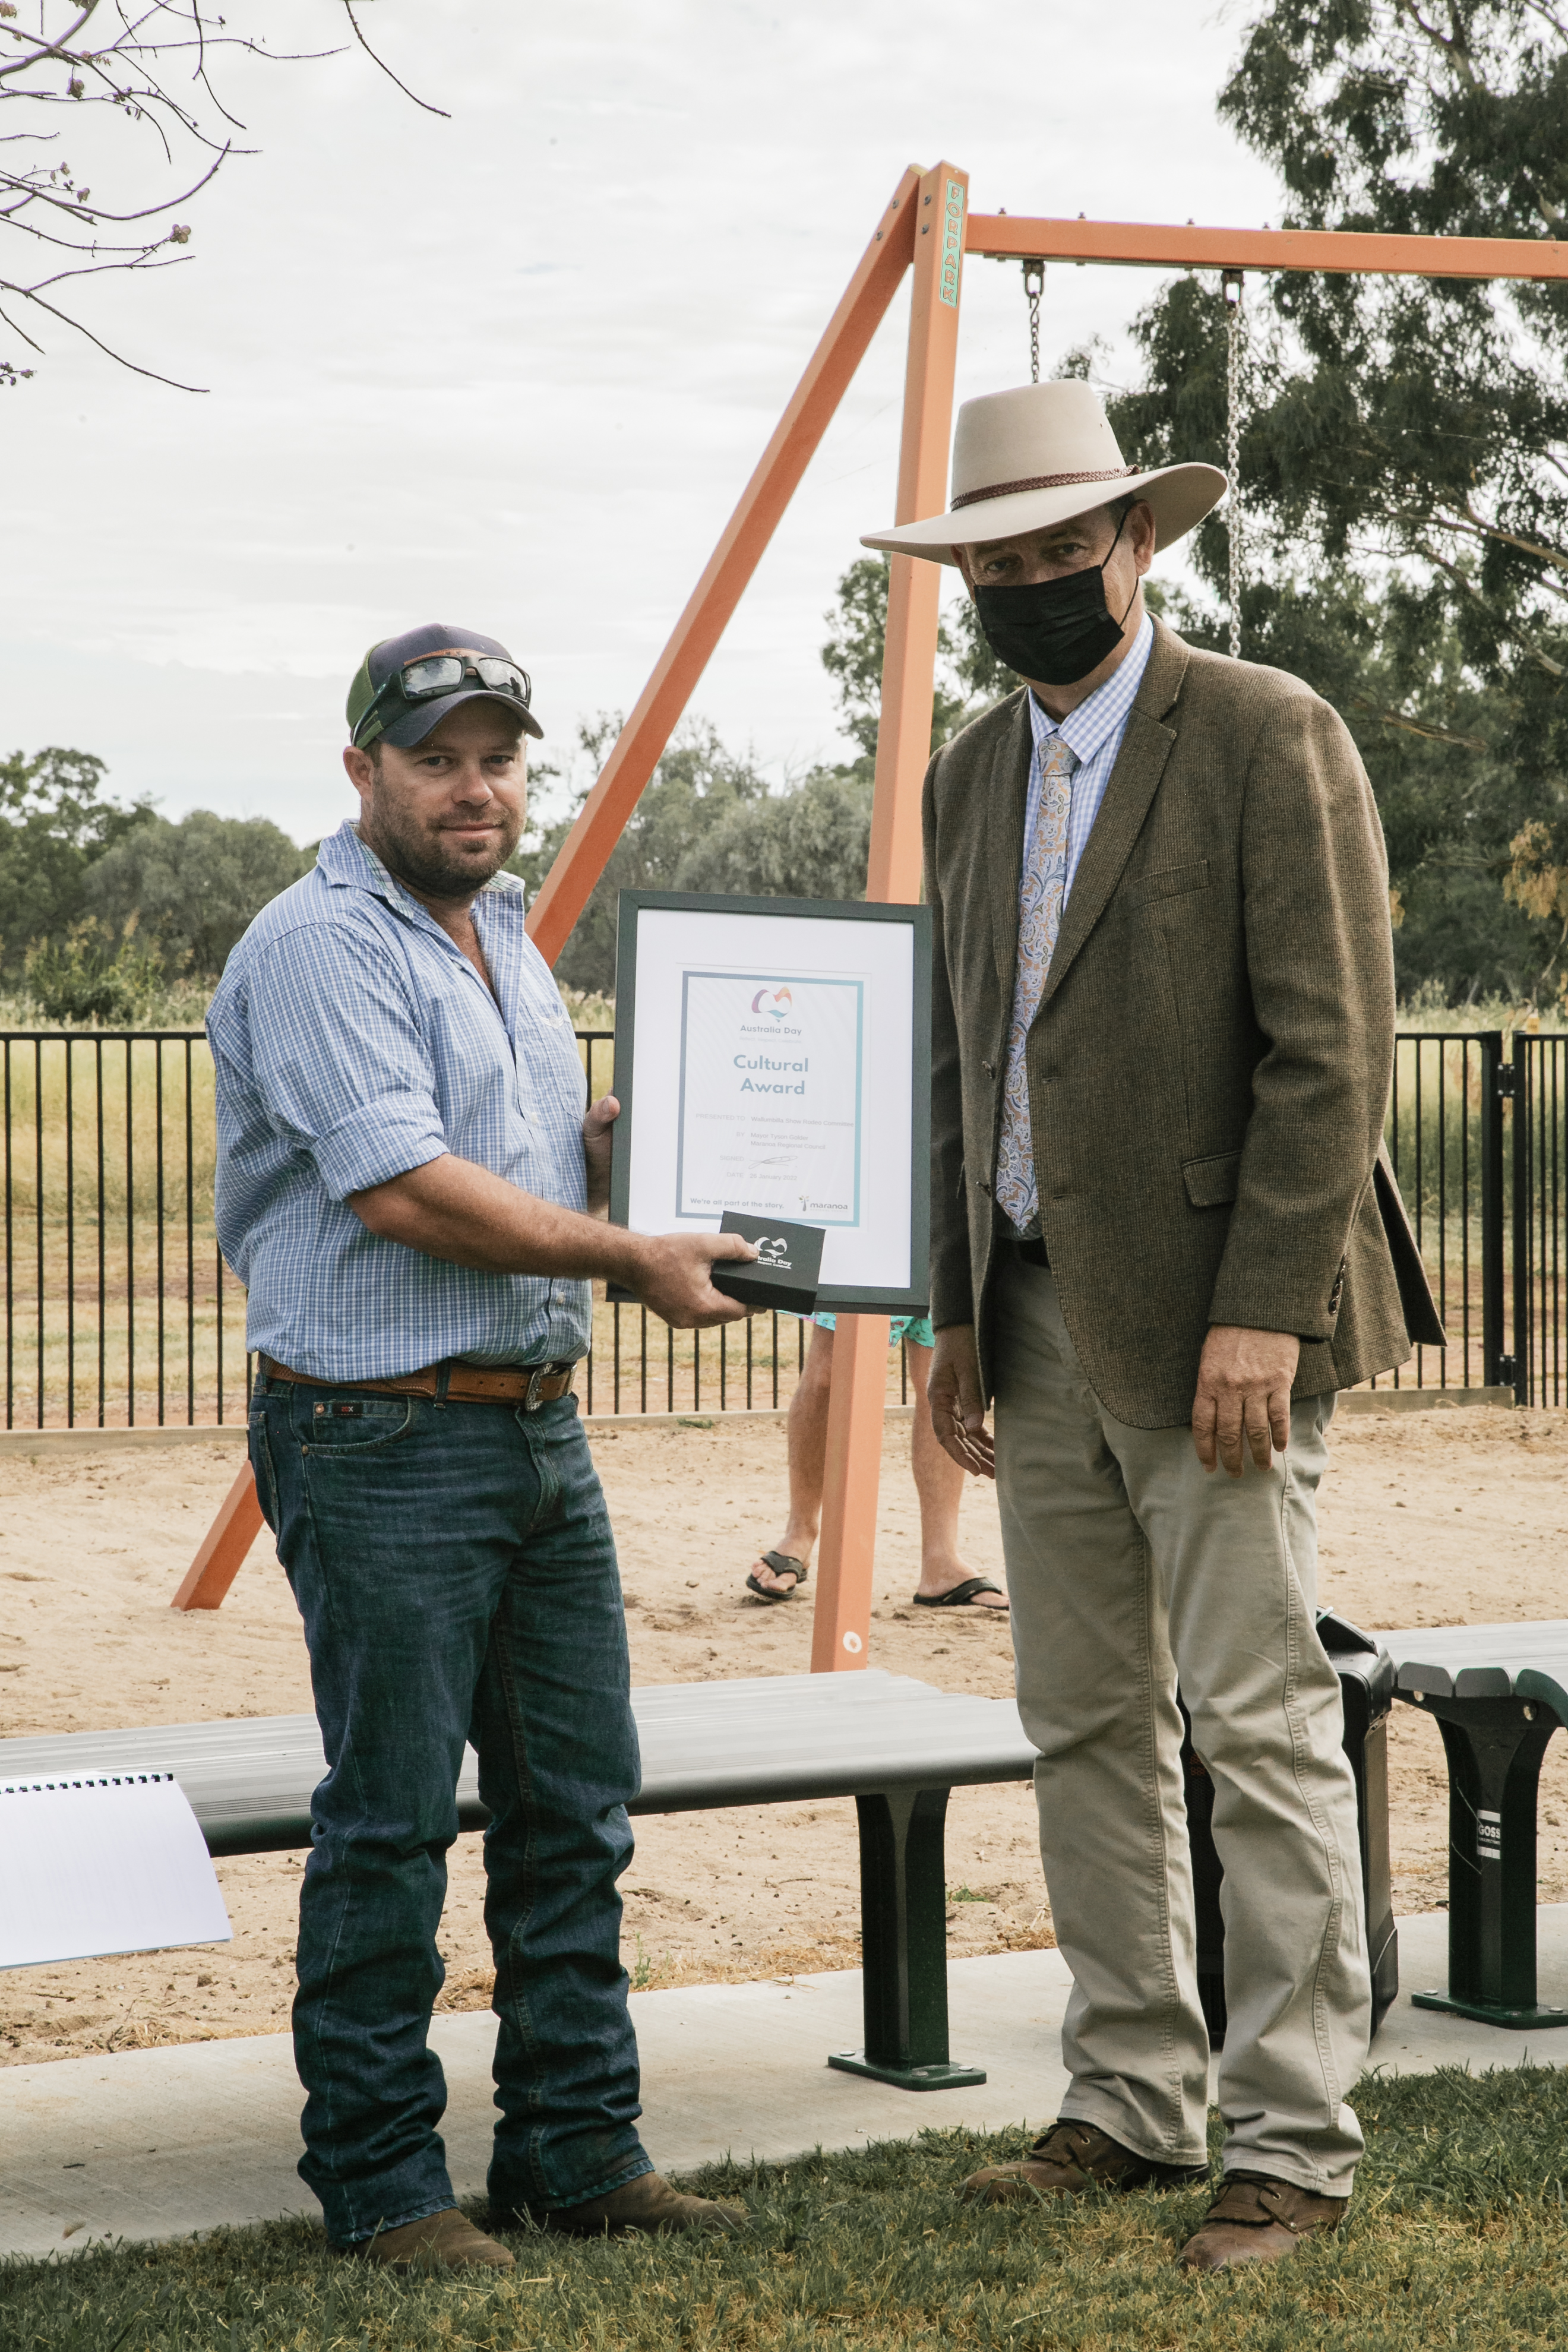 CULTURAL AWARD | Wallumbilla Show Rodeo Committee (accepted by Brendan Seawright)